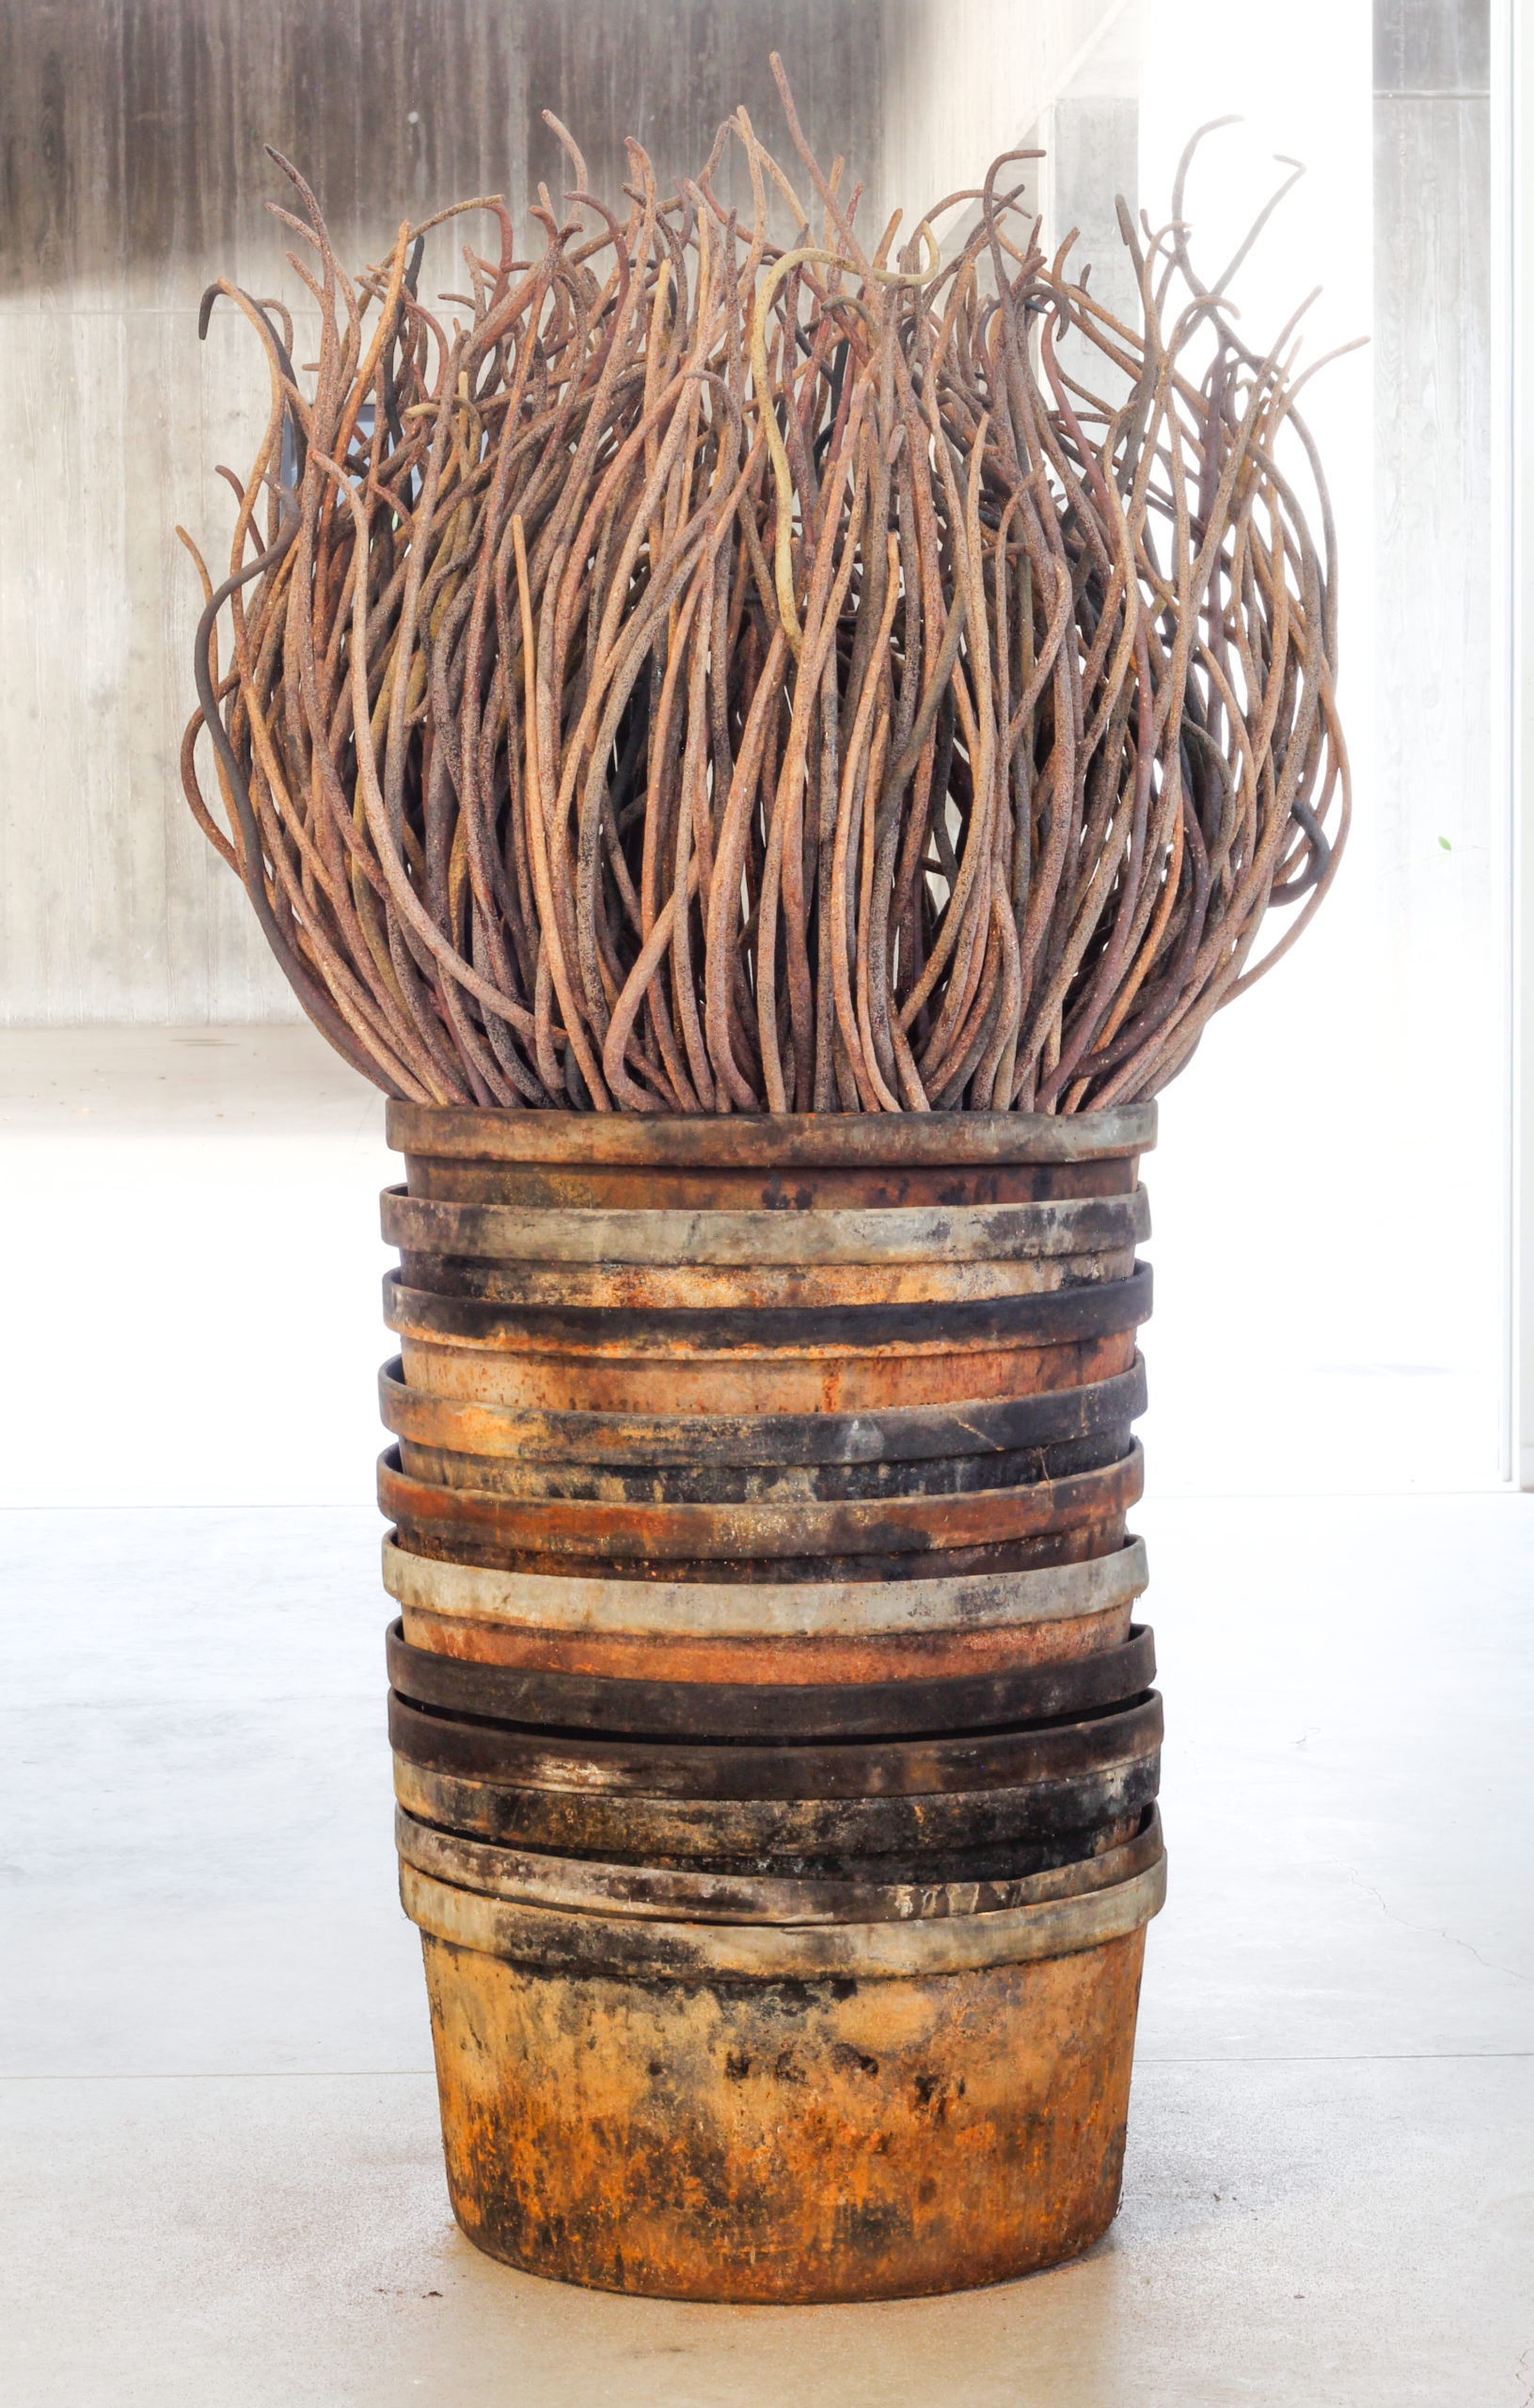 Ceramic and metal sculpture of a fire